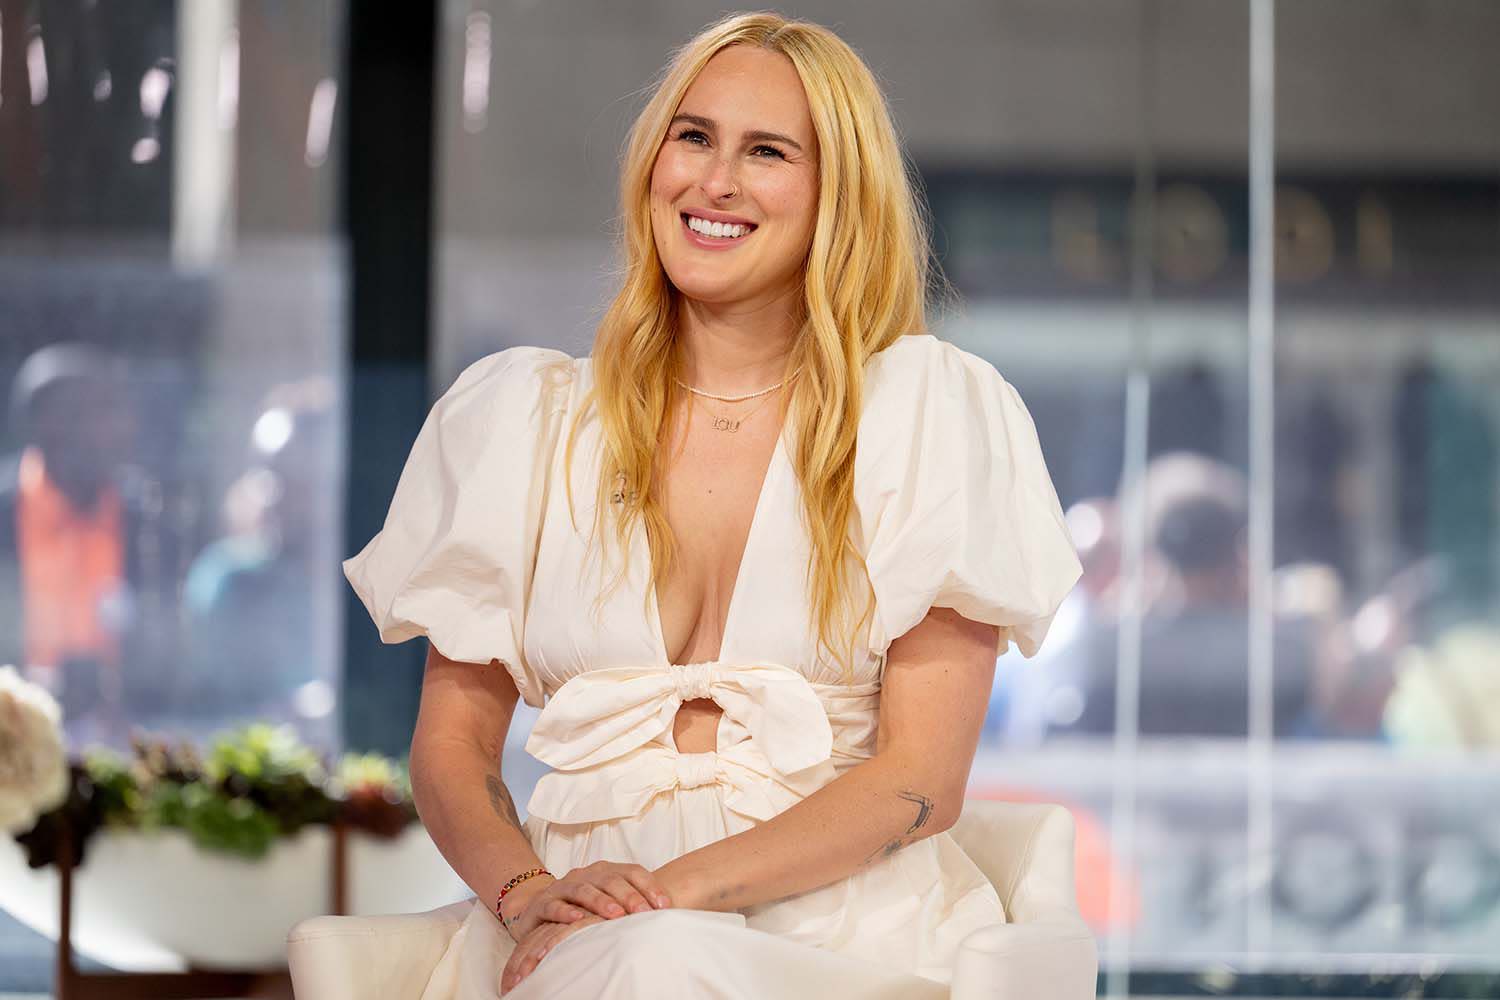 Rumer Willis Shares Breastfeeding Photos as She Says She Feels 'Privileged' Journey Has Been 'Filled with Ease'